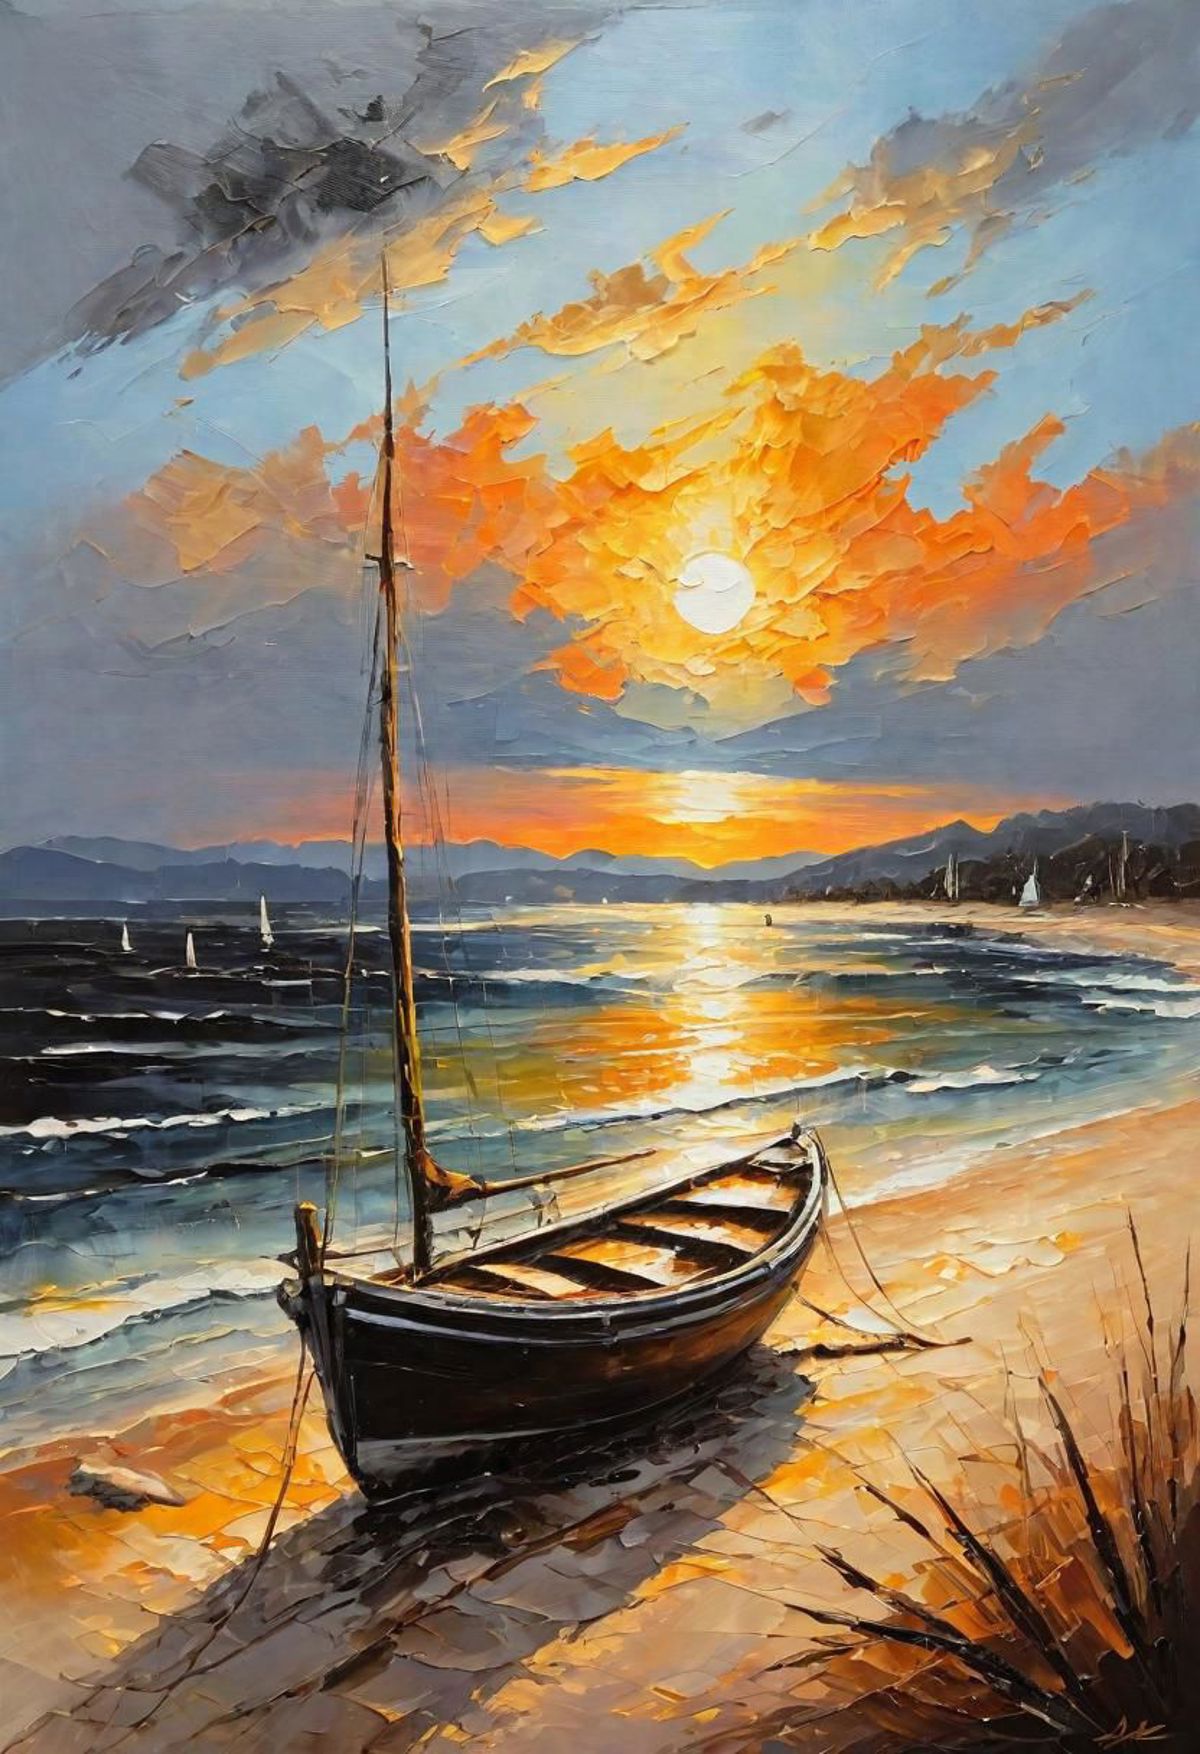 A painting of a boat on a beach at sunset.